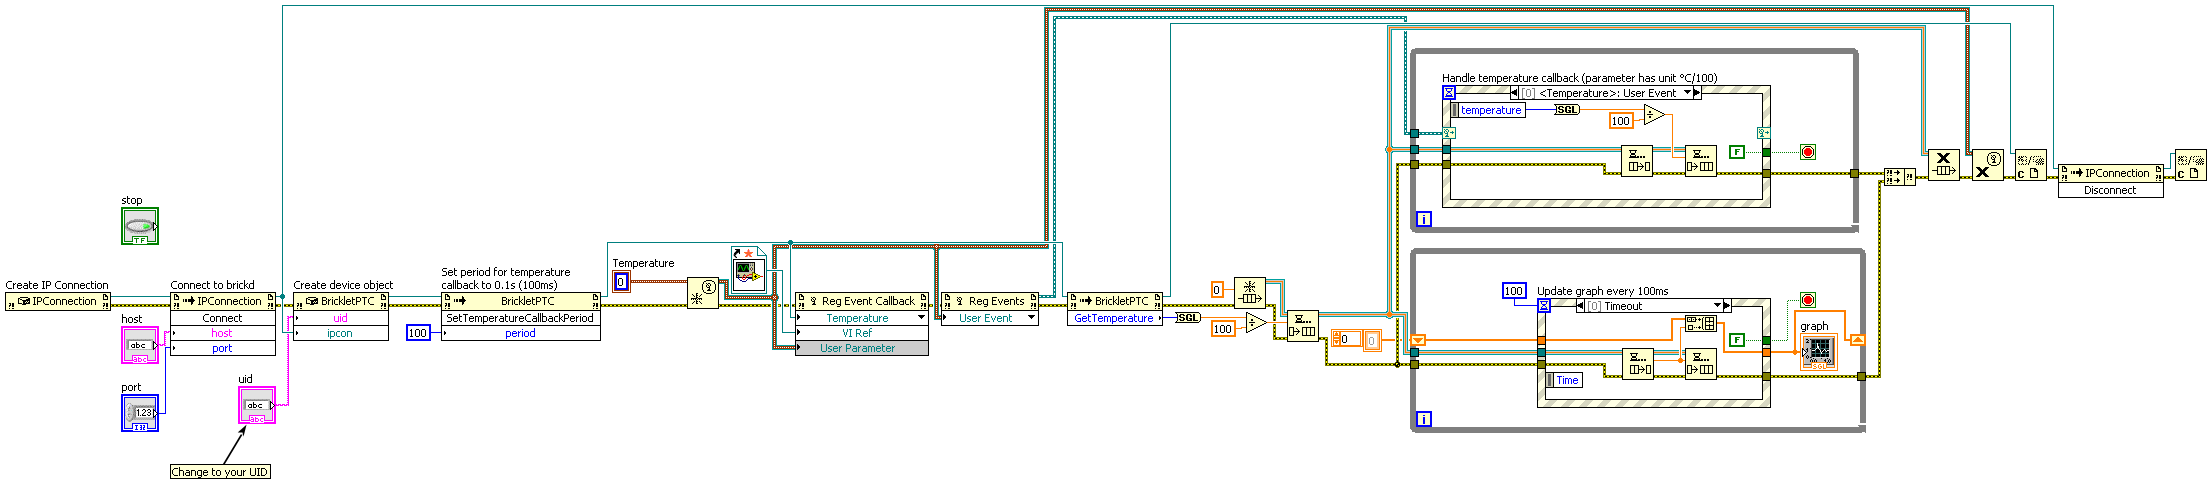 LabVIEW Graph Example